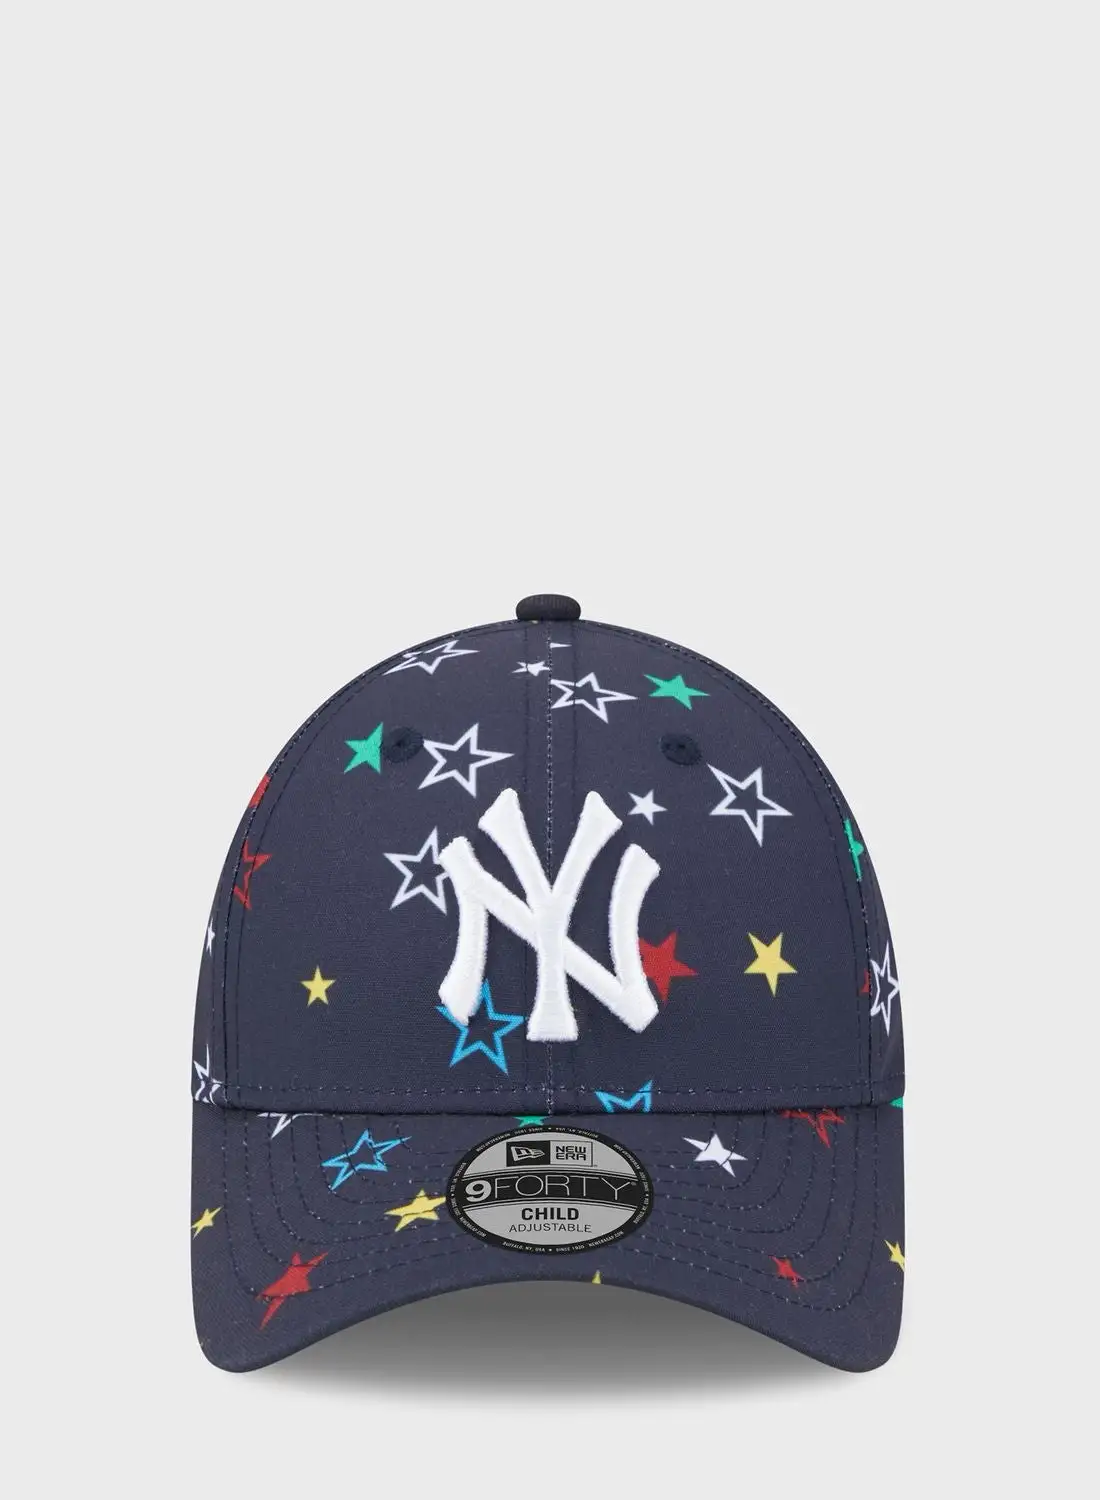 NEW ERA Youth 9Forty New York Yankees Cap